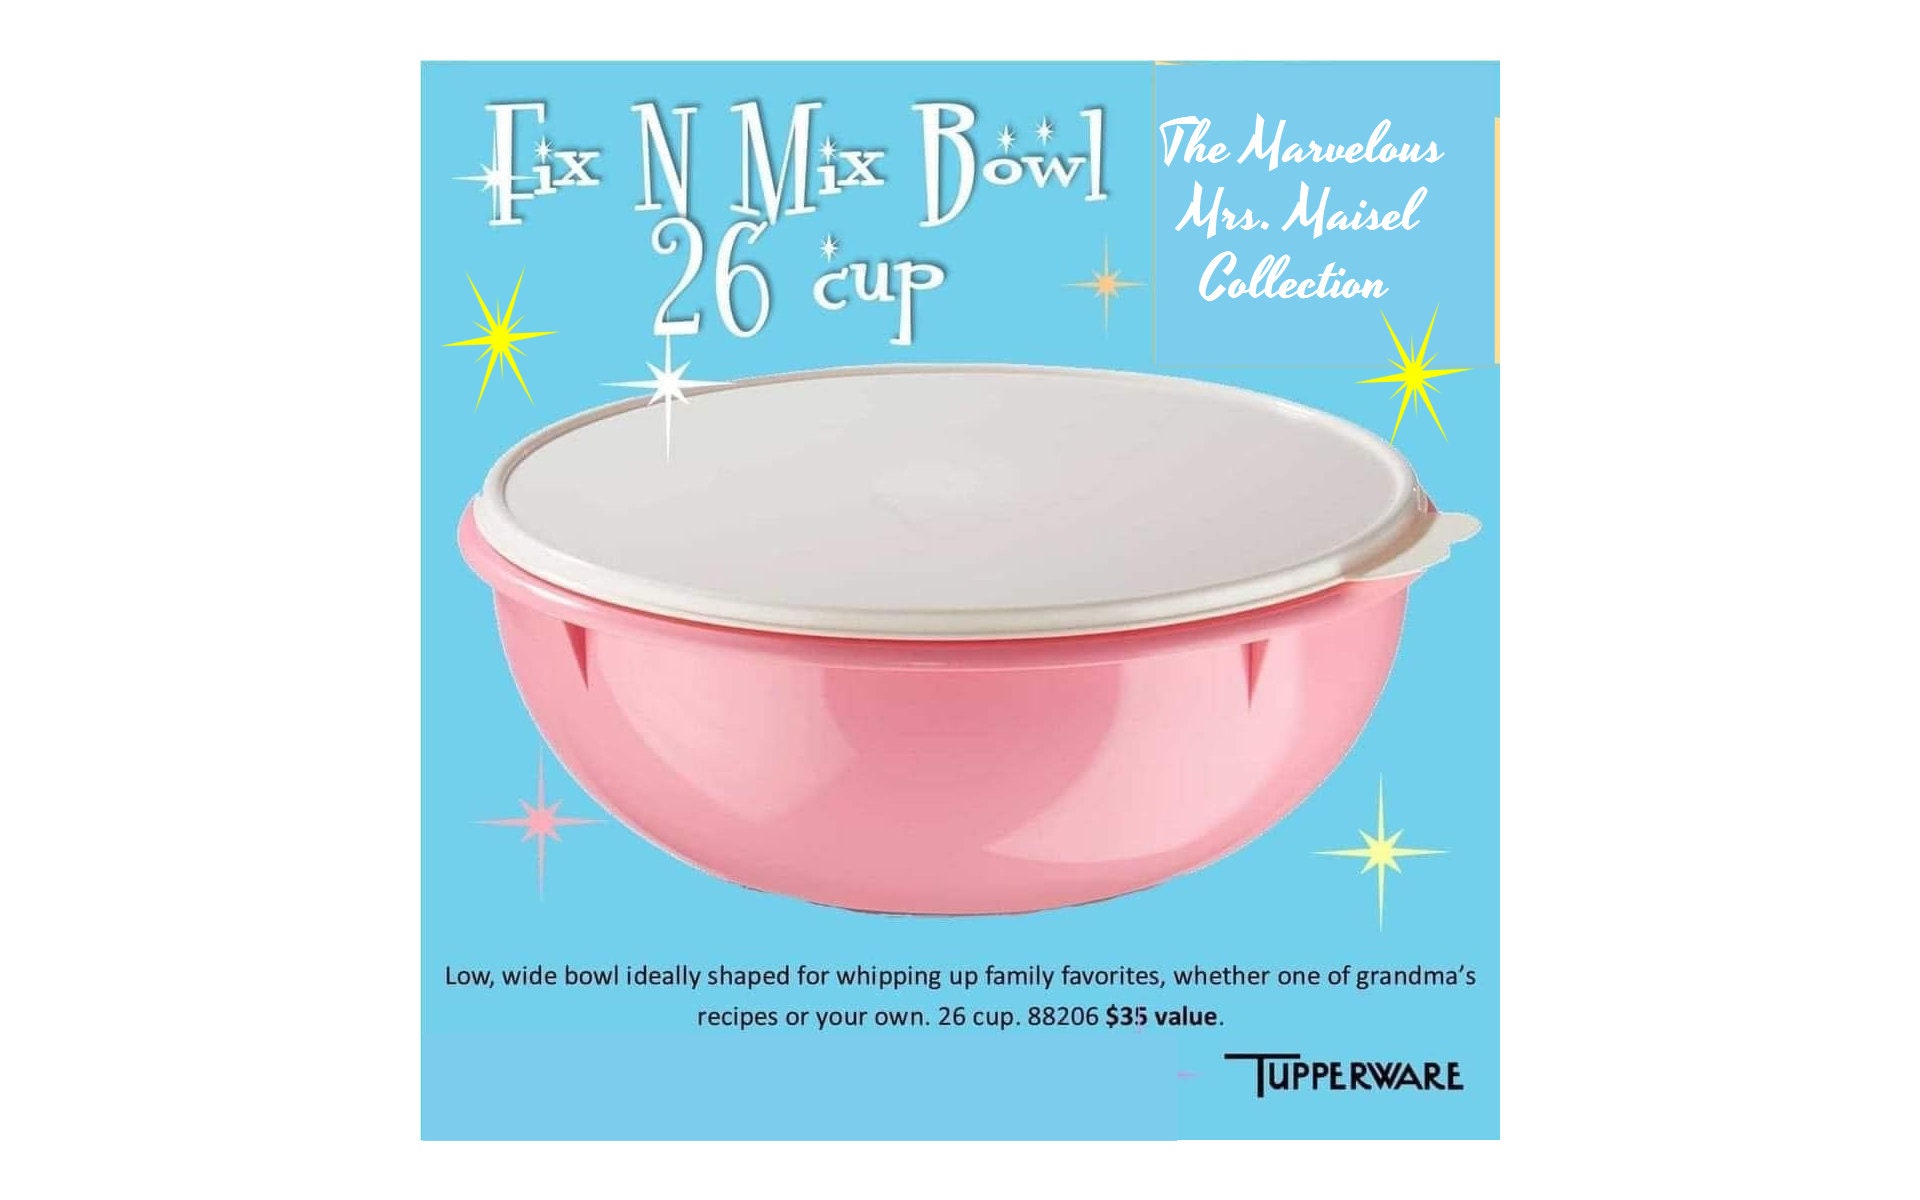 The Marvelous Mrs. Maisel' x Tupperware Is On Sale for Season 5